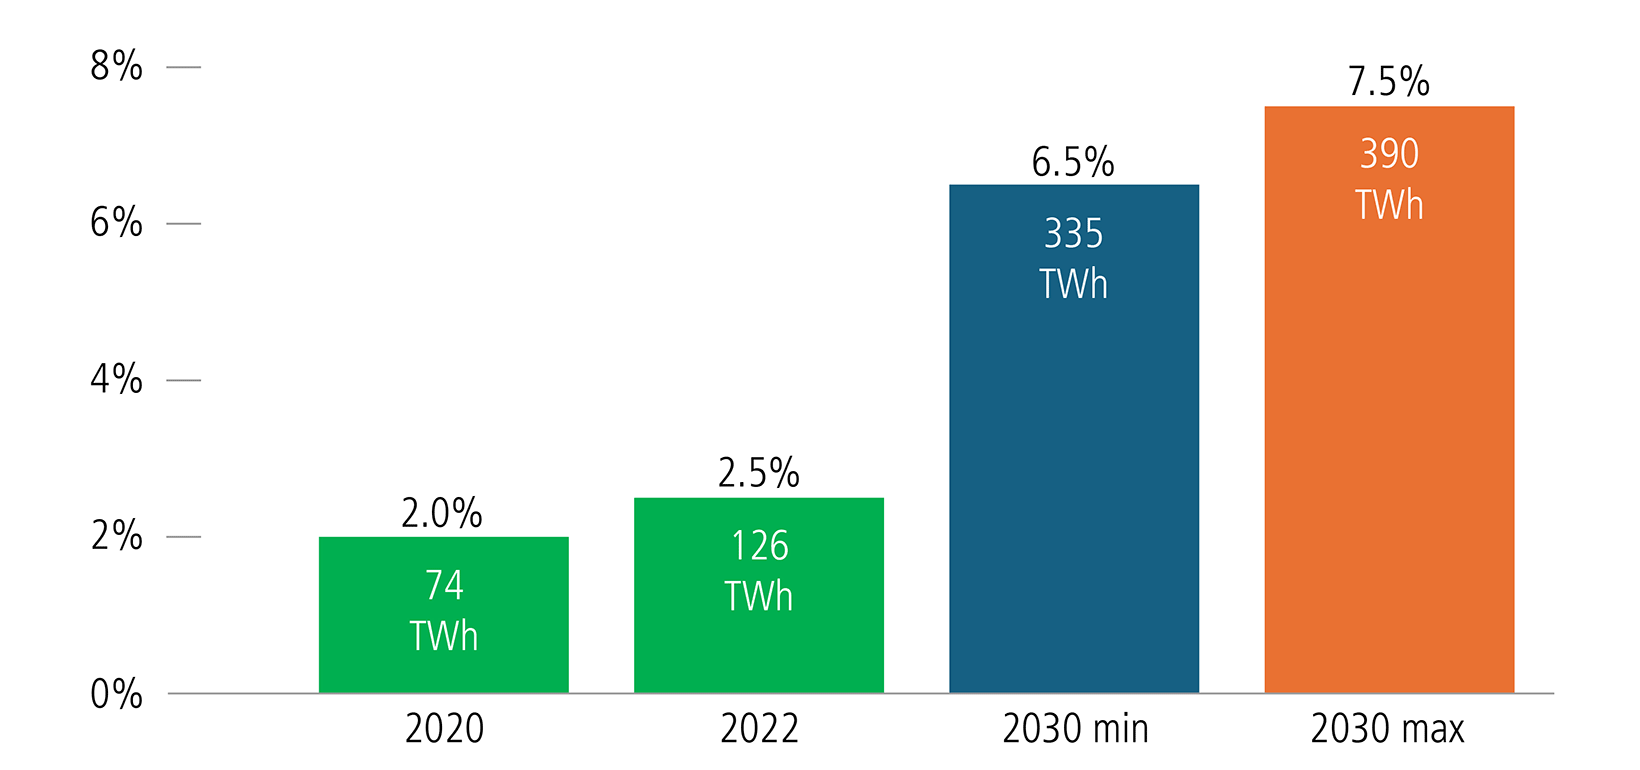 data centers % of US electricity consumption, 2020 2%, 2022 2.5%, 2030 min 6.5% max 7.5%